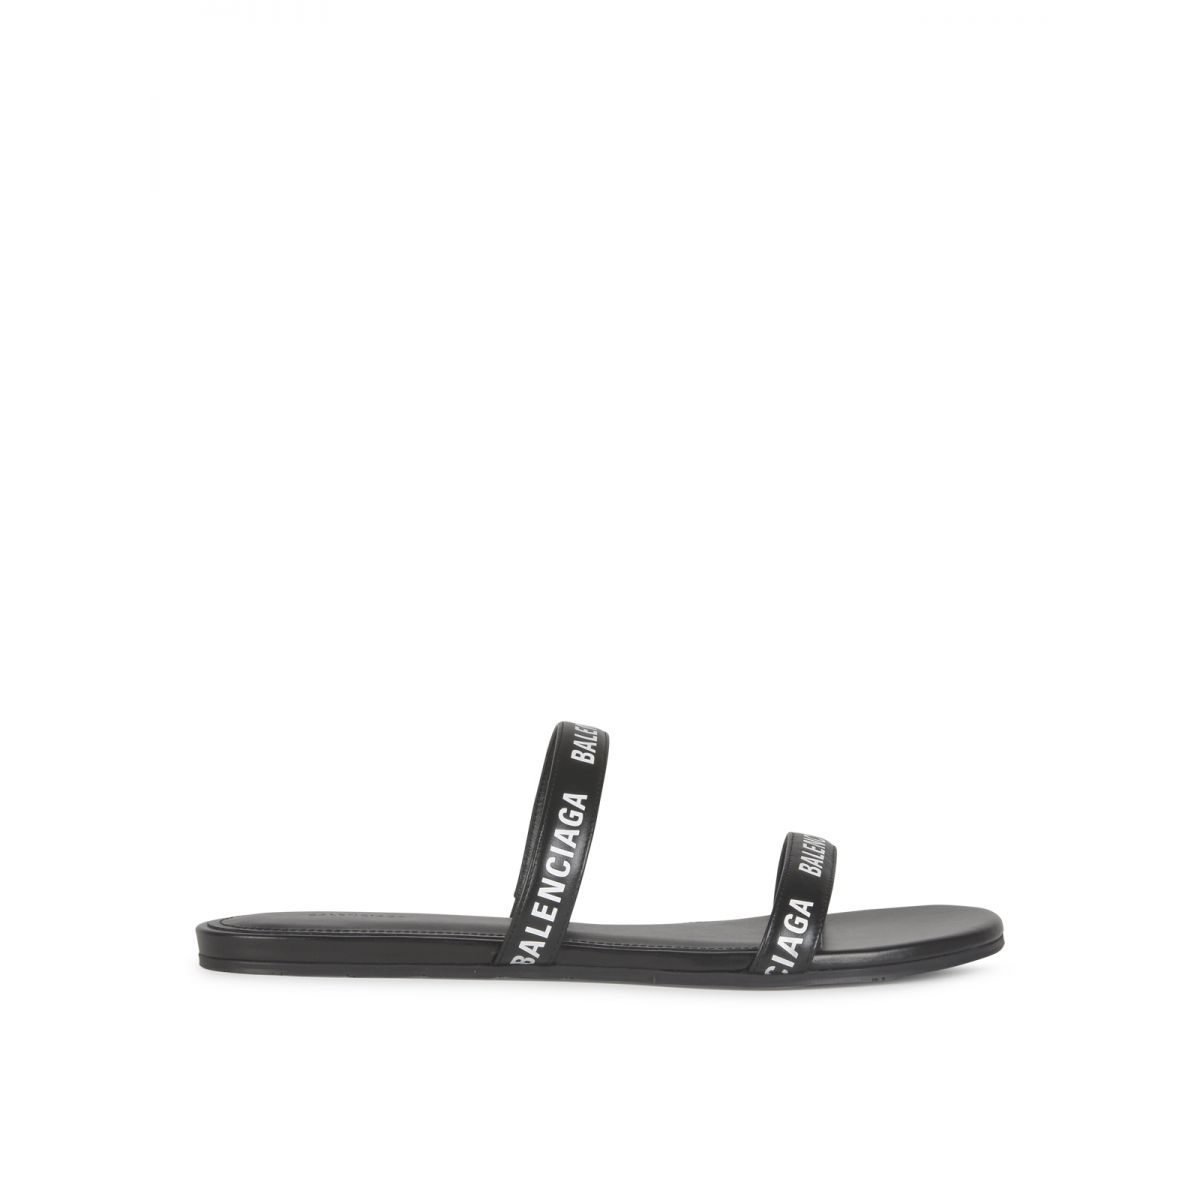 BALENCIAGA - Round flat sandal in black and white smooth calf leather